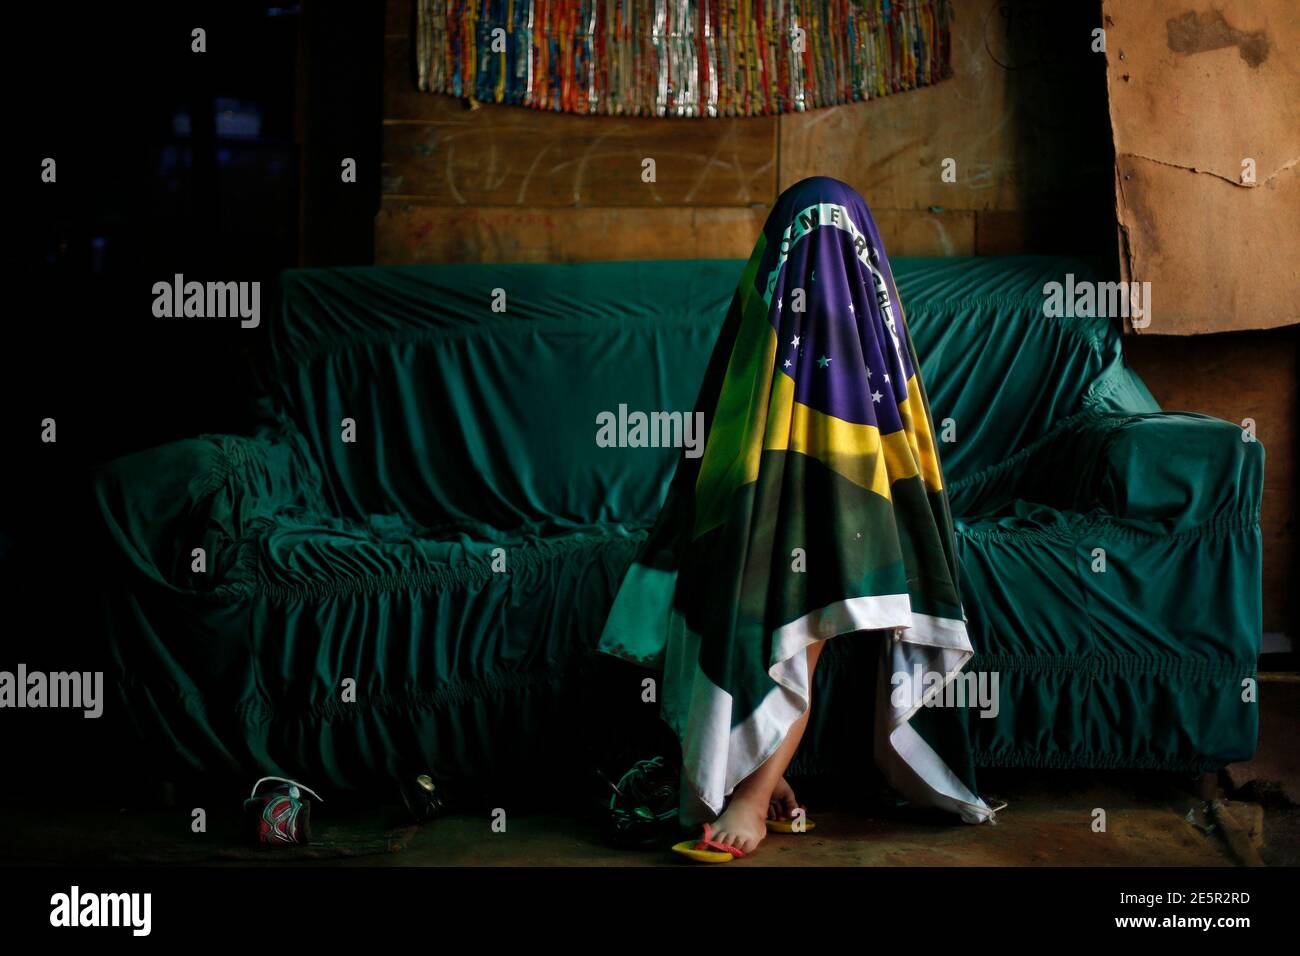 Camile Maria Souto, 3, plays with a Brazilian flag during the 2014 World Cup round of 16 game between Brazil and Chile in her family home in the Sobradinho working class neighborhood of Brasilia June 28, 2014.    REUTERS/Ueslei Marcelino (BRAZIL  - Tags: SPORT SOCCER WORLD CUP SOCIETY) Stock Photo